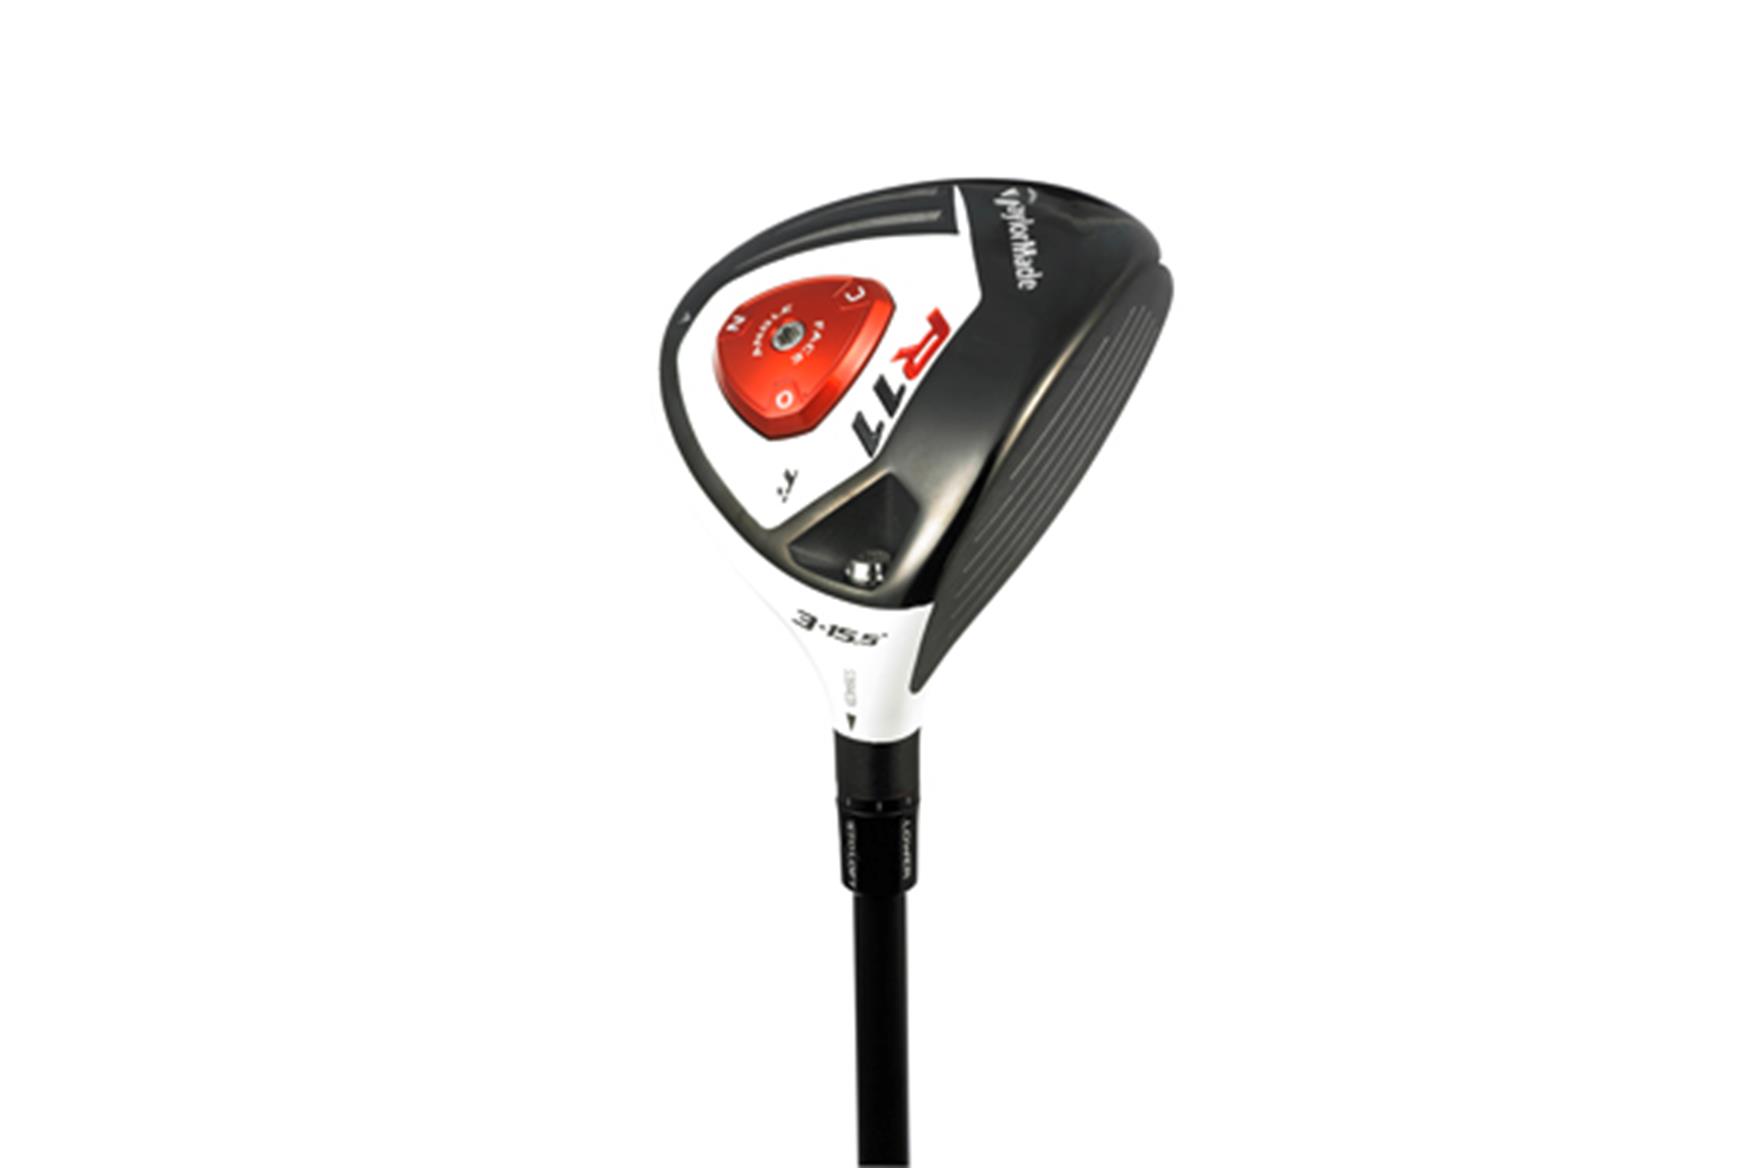 taylormade r11 driver review